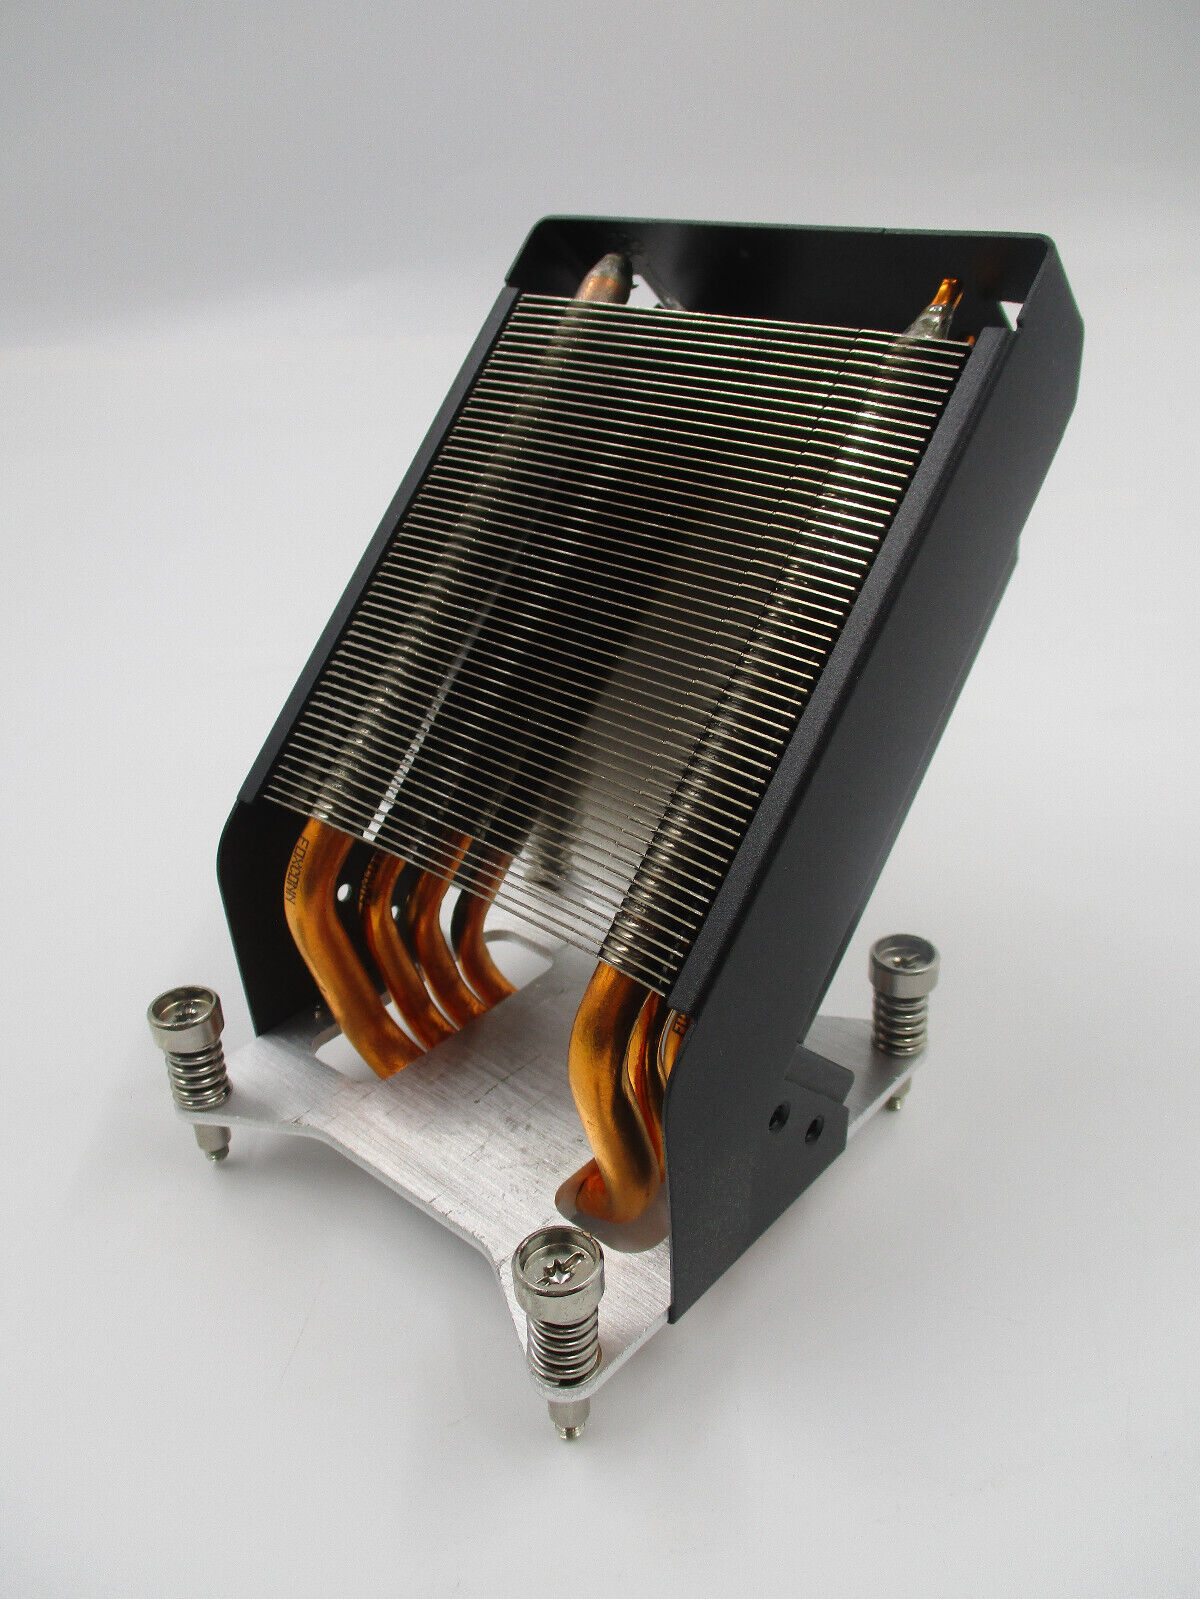 HP Z840 Z820 Workstation Heat Sink Air Cooler HP  P/N: 749598-001 Tested Working